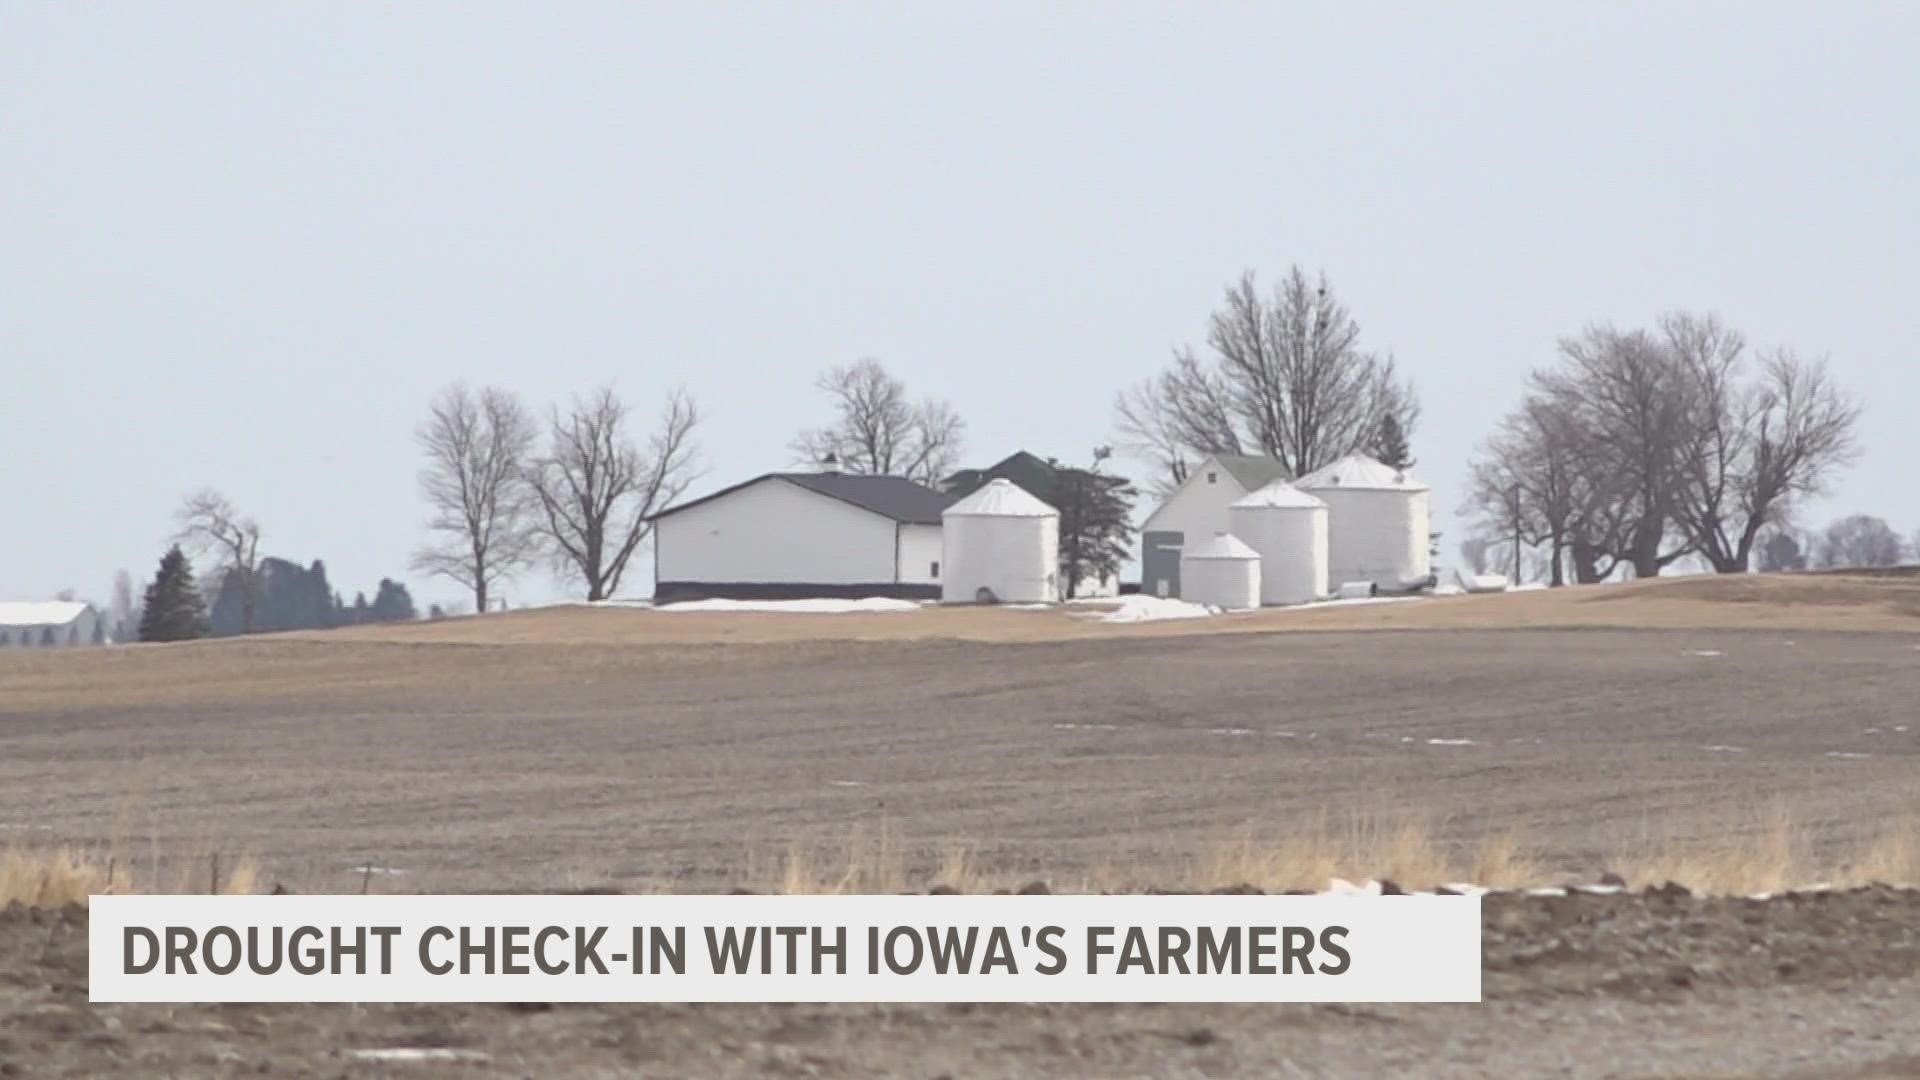 With very little precipitation over the past month, here's what that means for central Iowa crops.